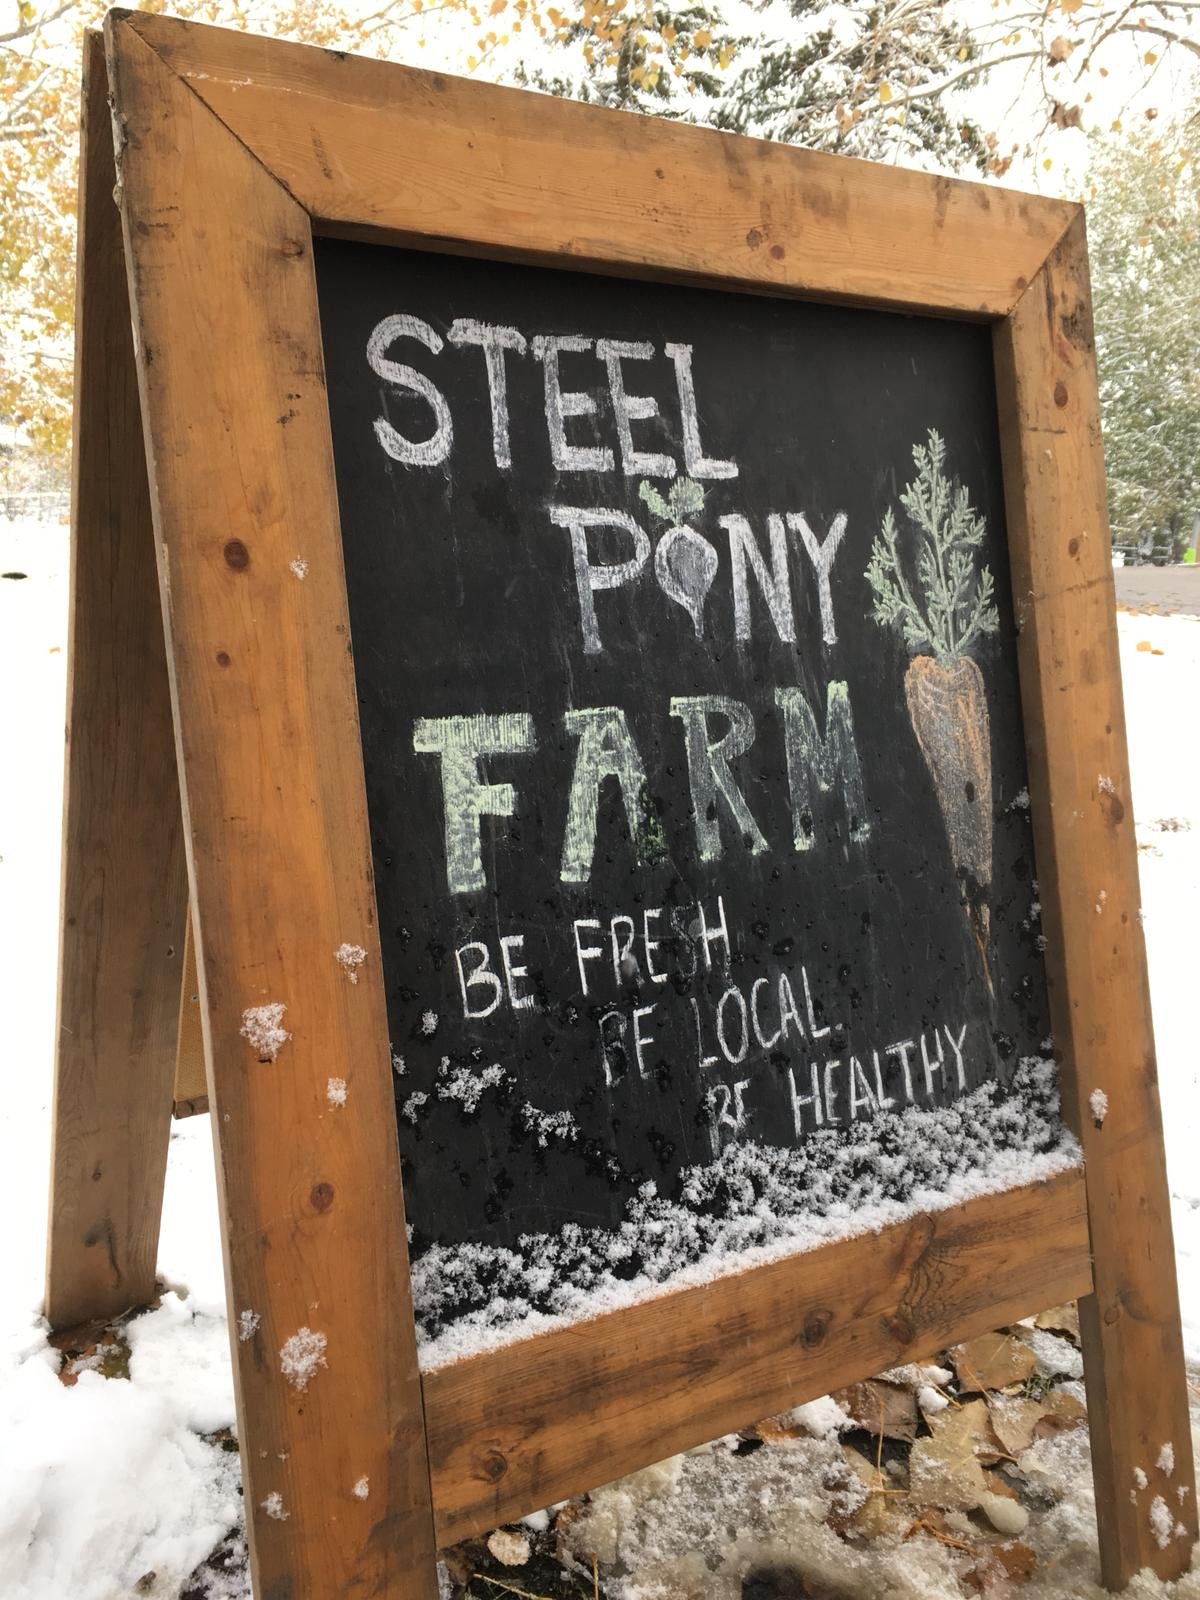 Next Happening: Farm Happening Oct 9th and 10th - Potential Fall/Winter Share and Auto-Renew